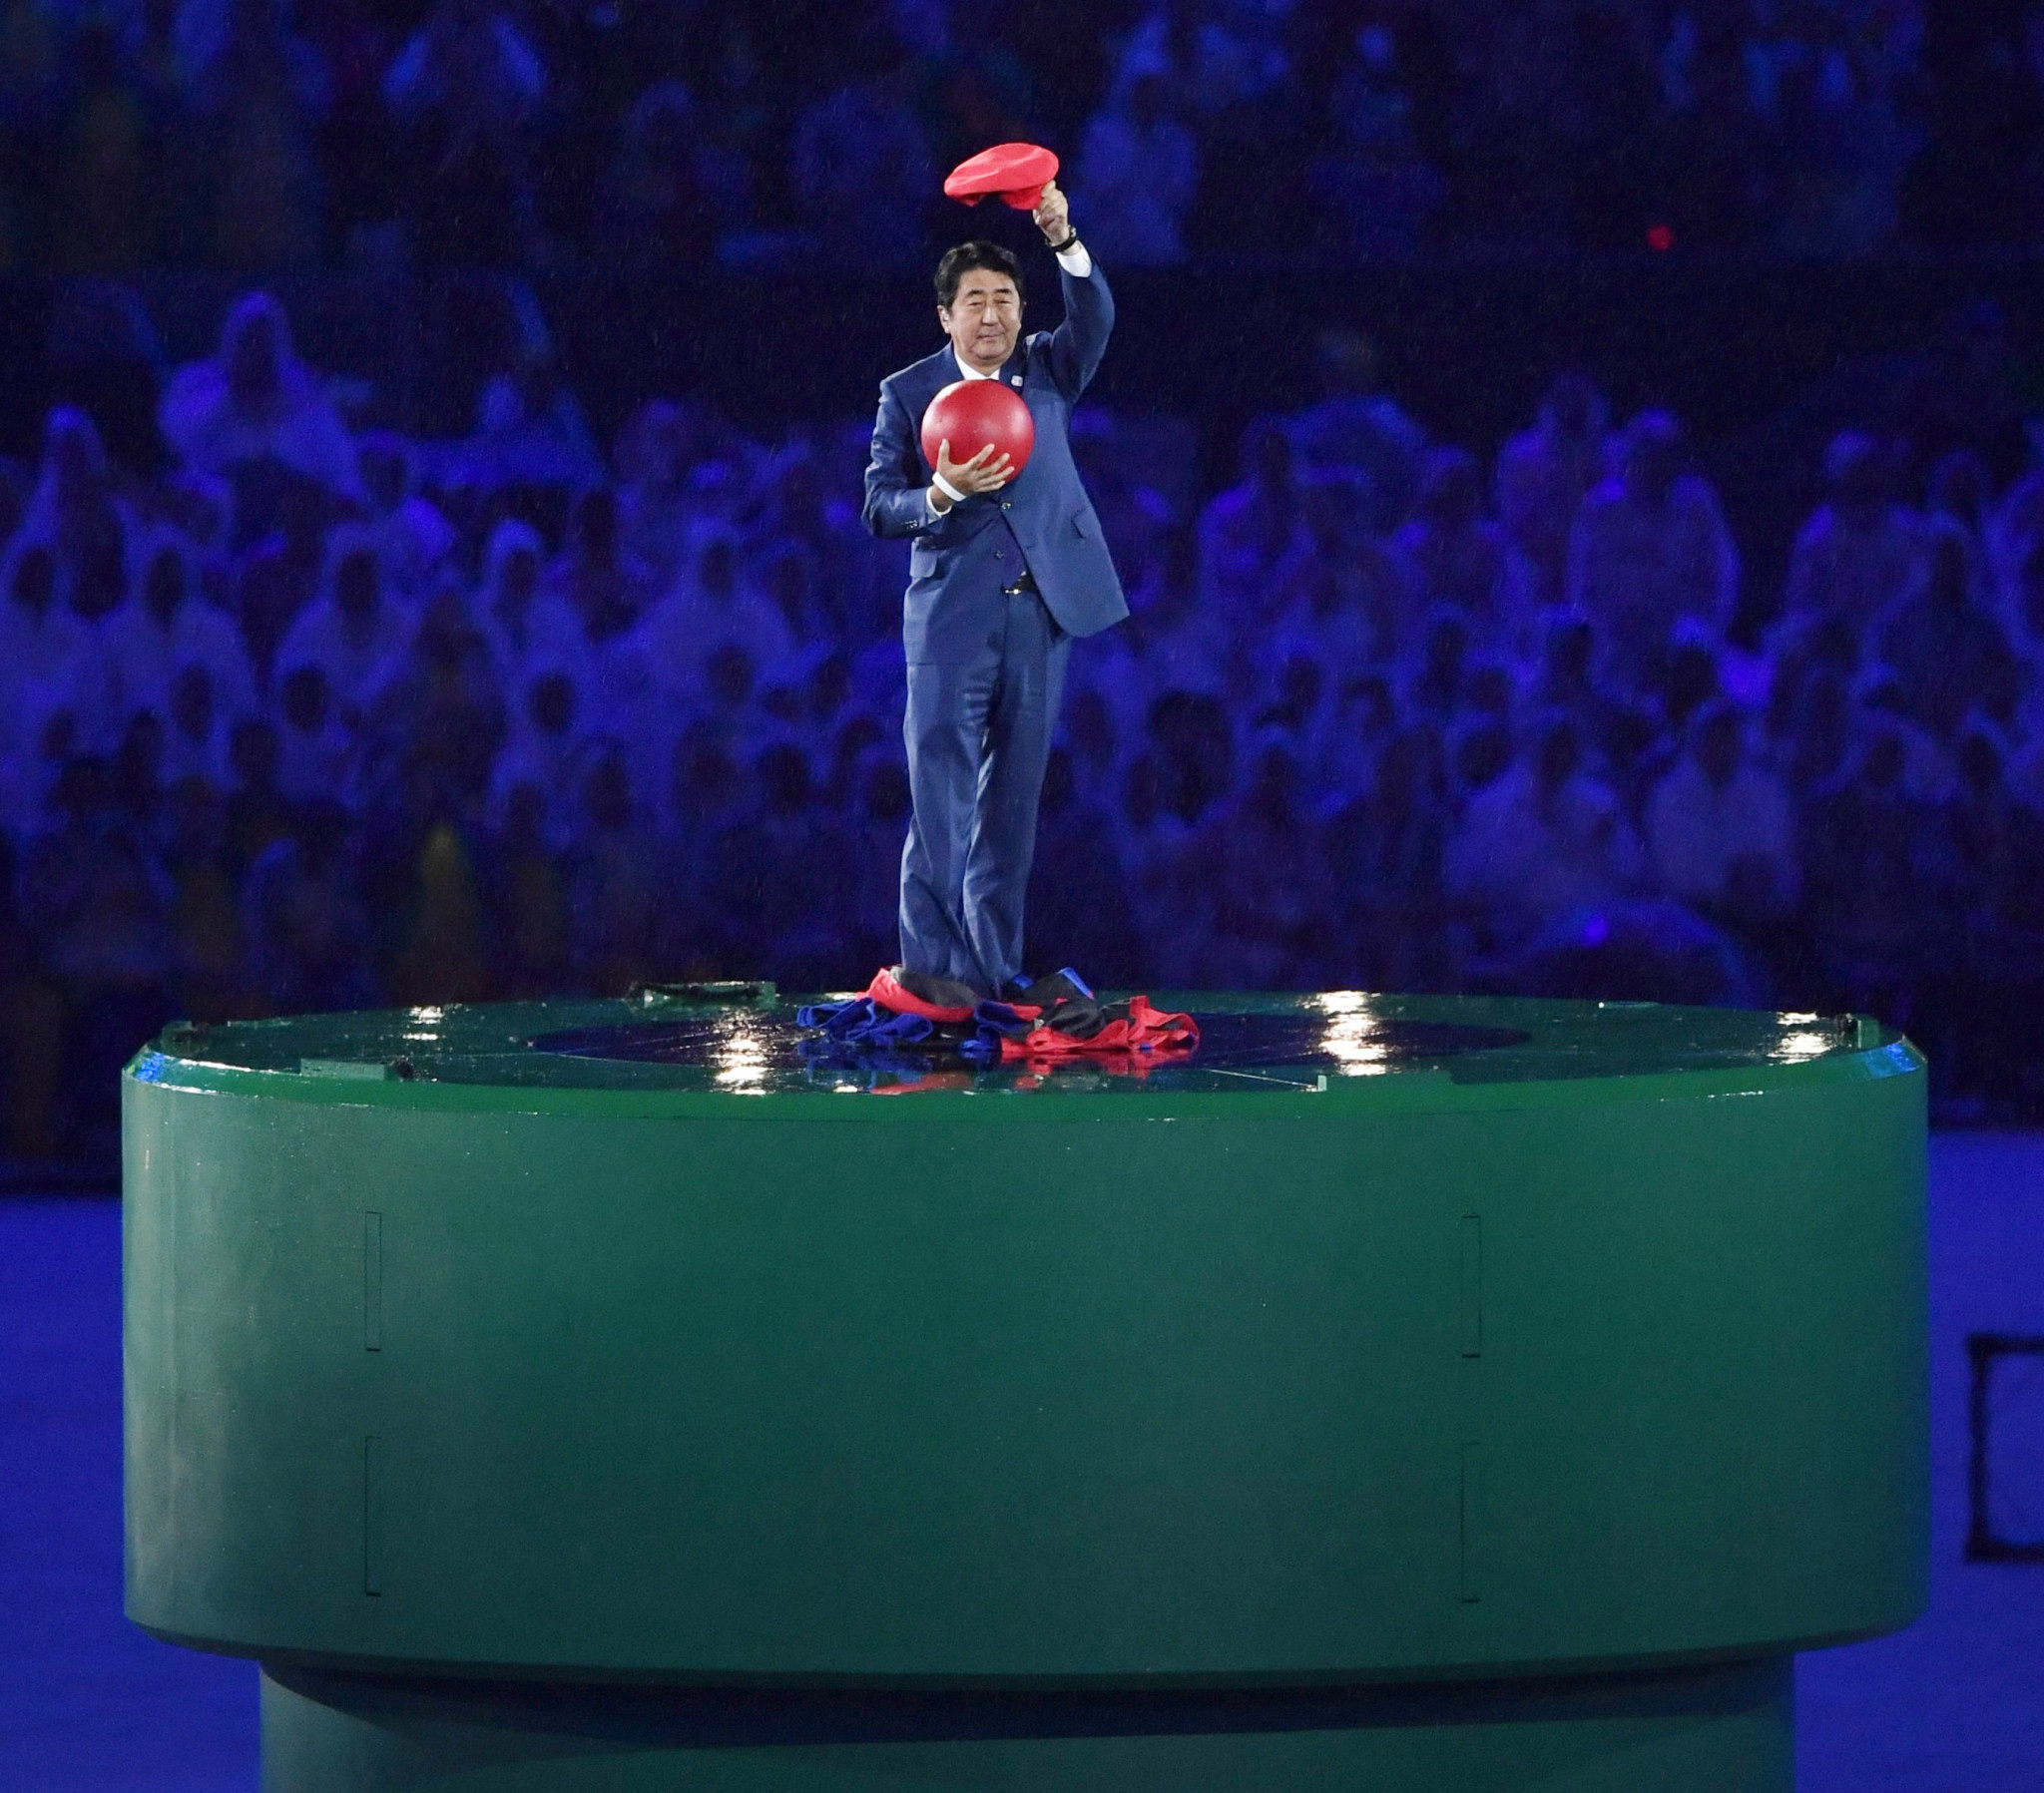 Japanese Prime Minister Shinzō Abe was the star of the Rio 2016 Closing Ceremony when he appeared dressed as Nintendo character Super Mario ©Getty Images